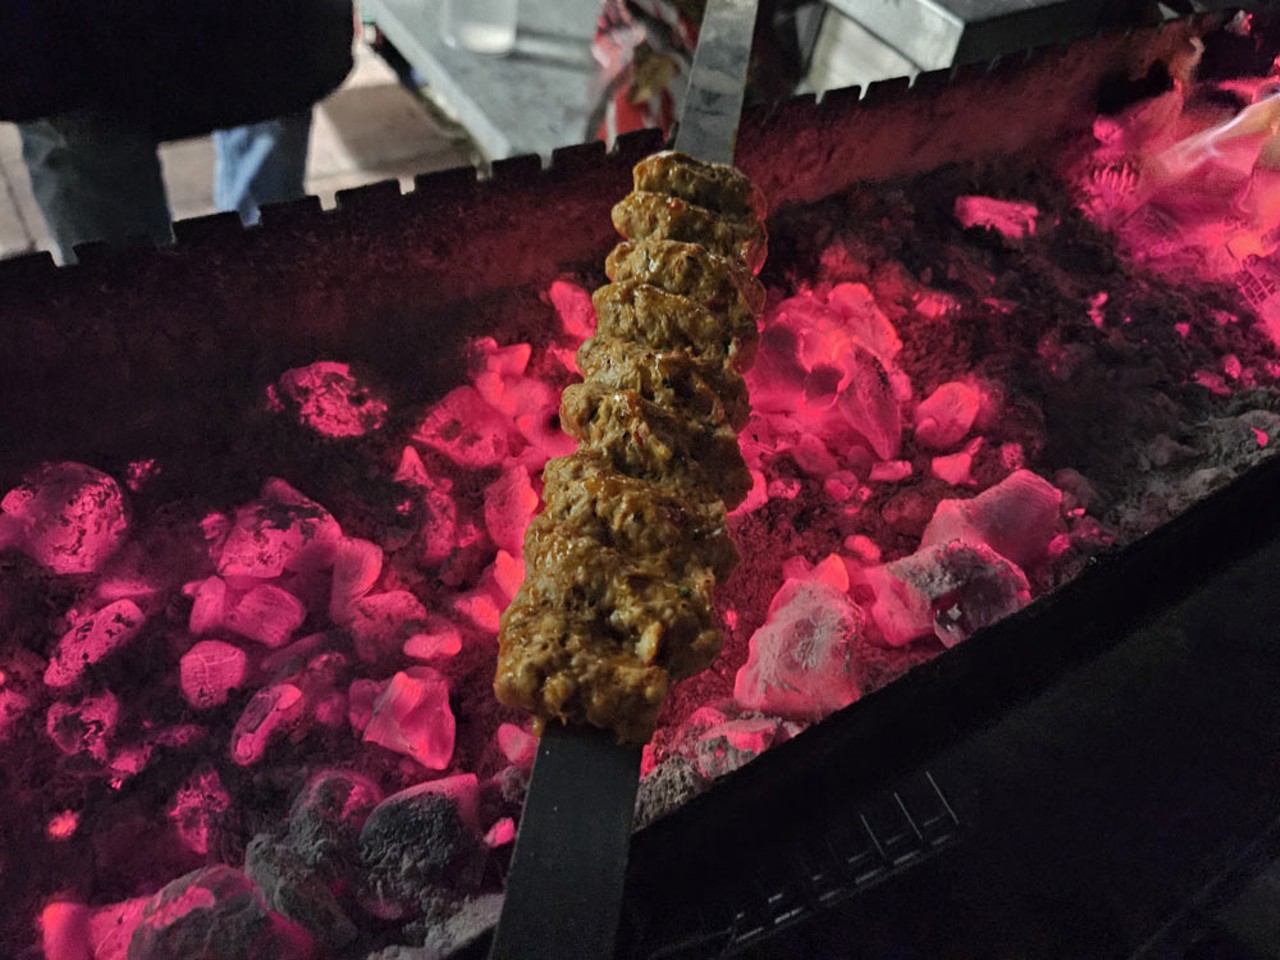       Caravan Uzbek & Turkish Cuisine: Adana kebabs         Chicken or lamb, take your pick, but both of these charred tubes of brilliance grilled over open charcoal are as good a kebab you'll have in the city — spiced, succulent and licked with the flavor only glowing chunks of carbon can provide.  